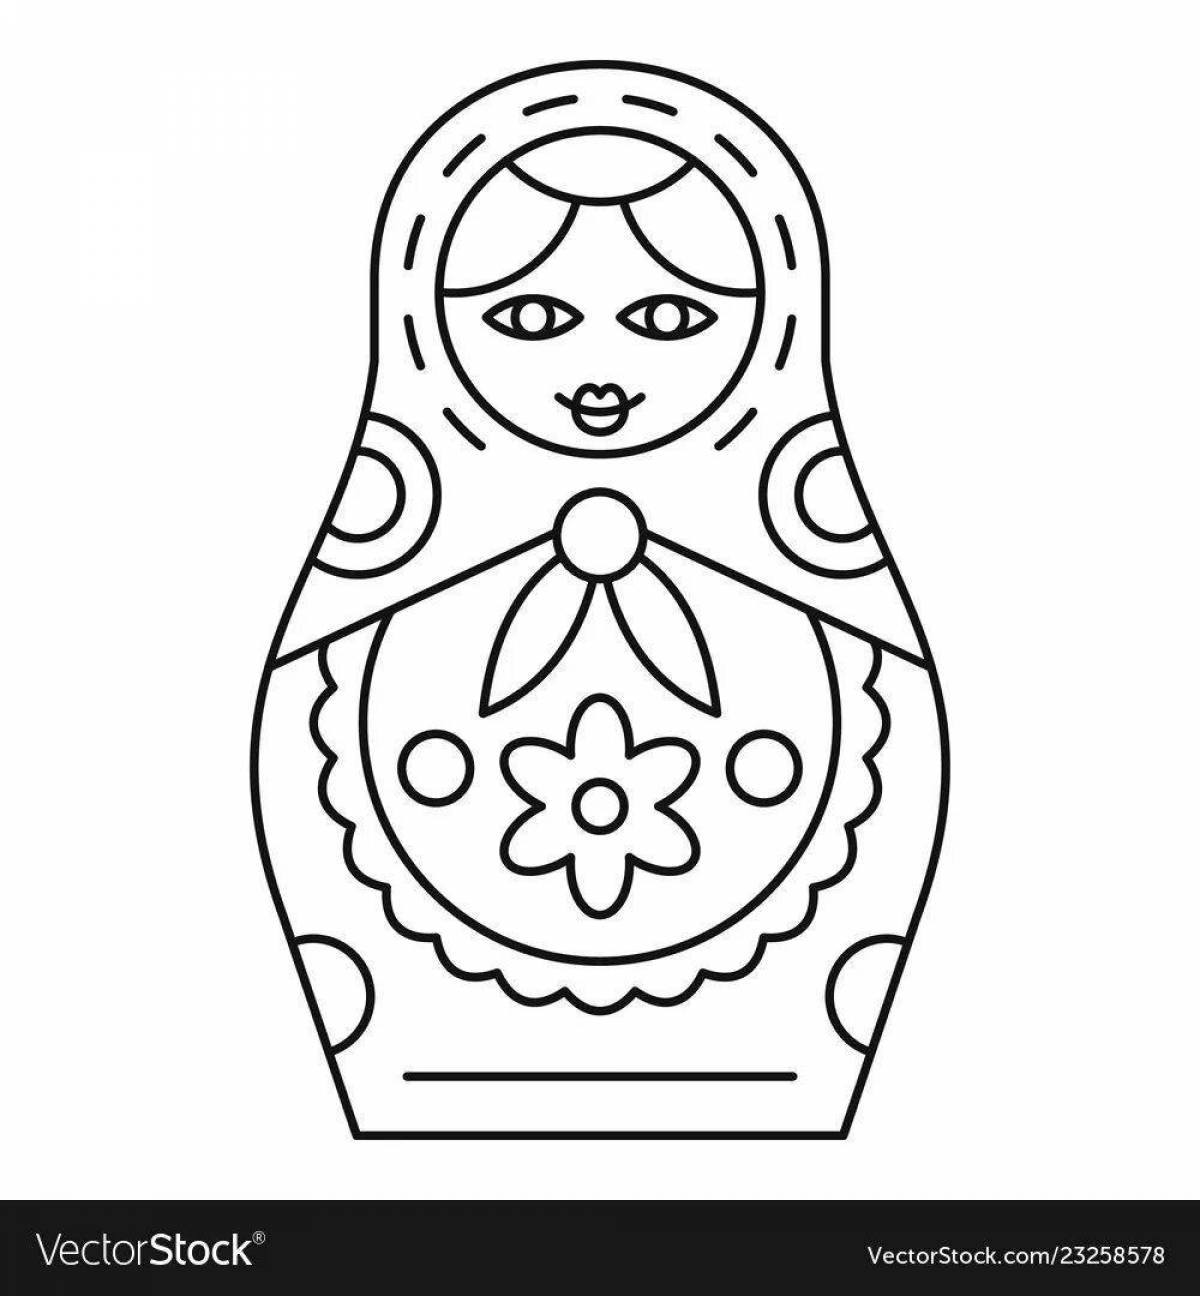 Merry matryoshka coloring book for kids